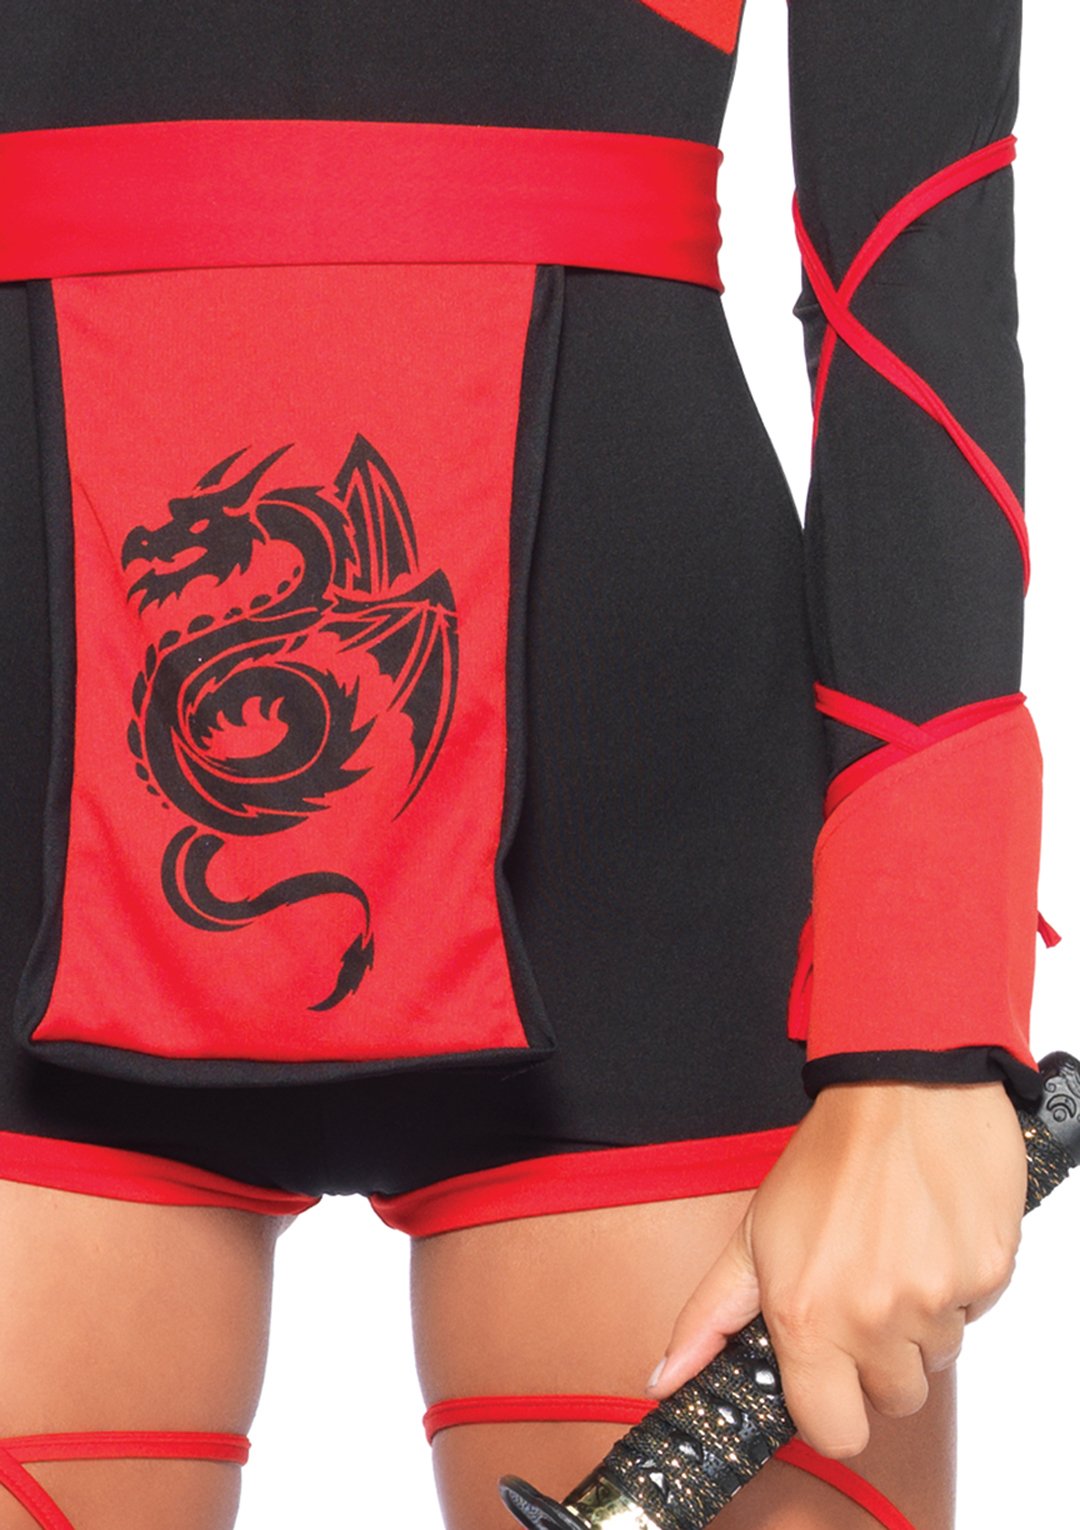 Dragon Ninja Hooded Keyhole Romper with Sash and Face Mask